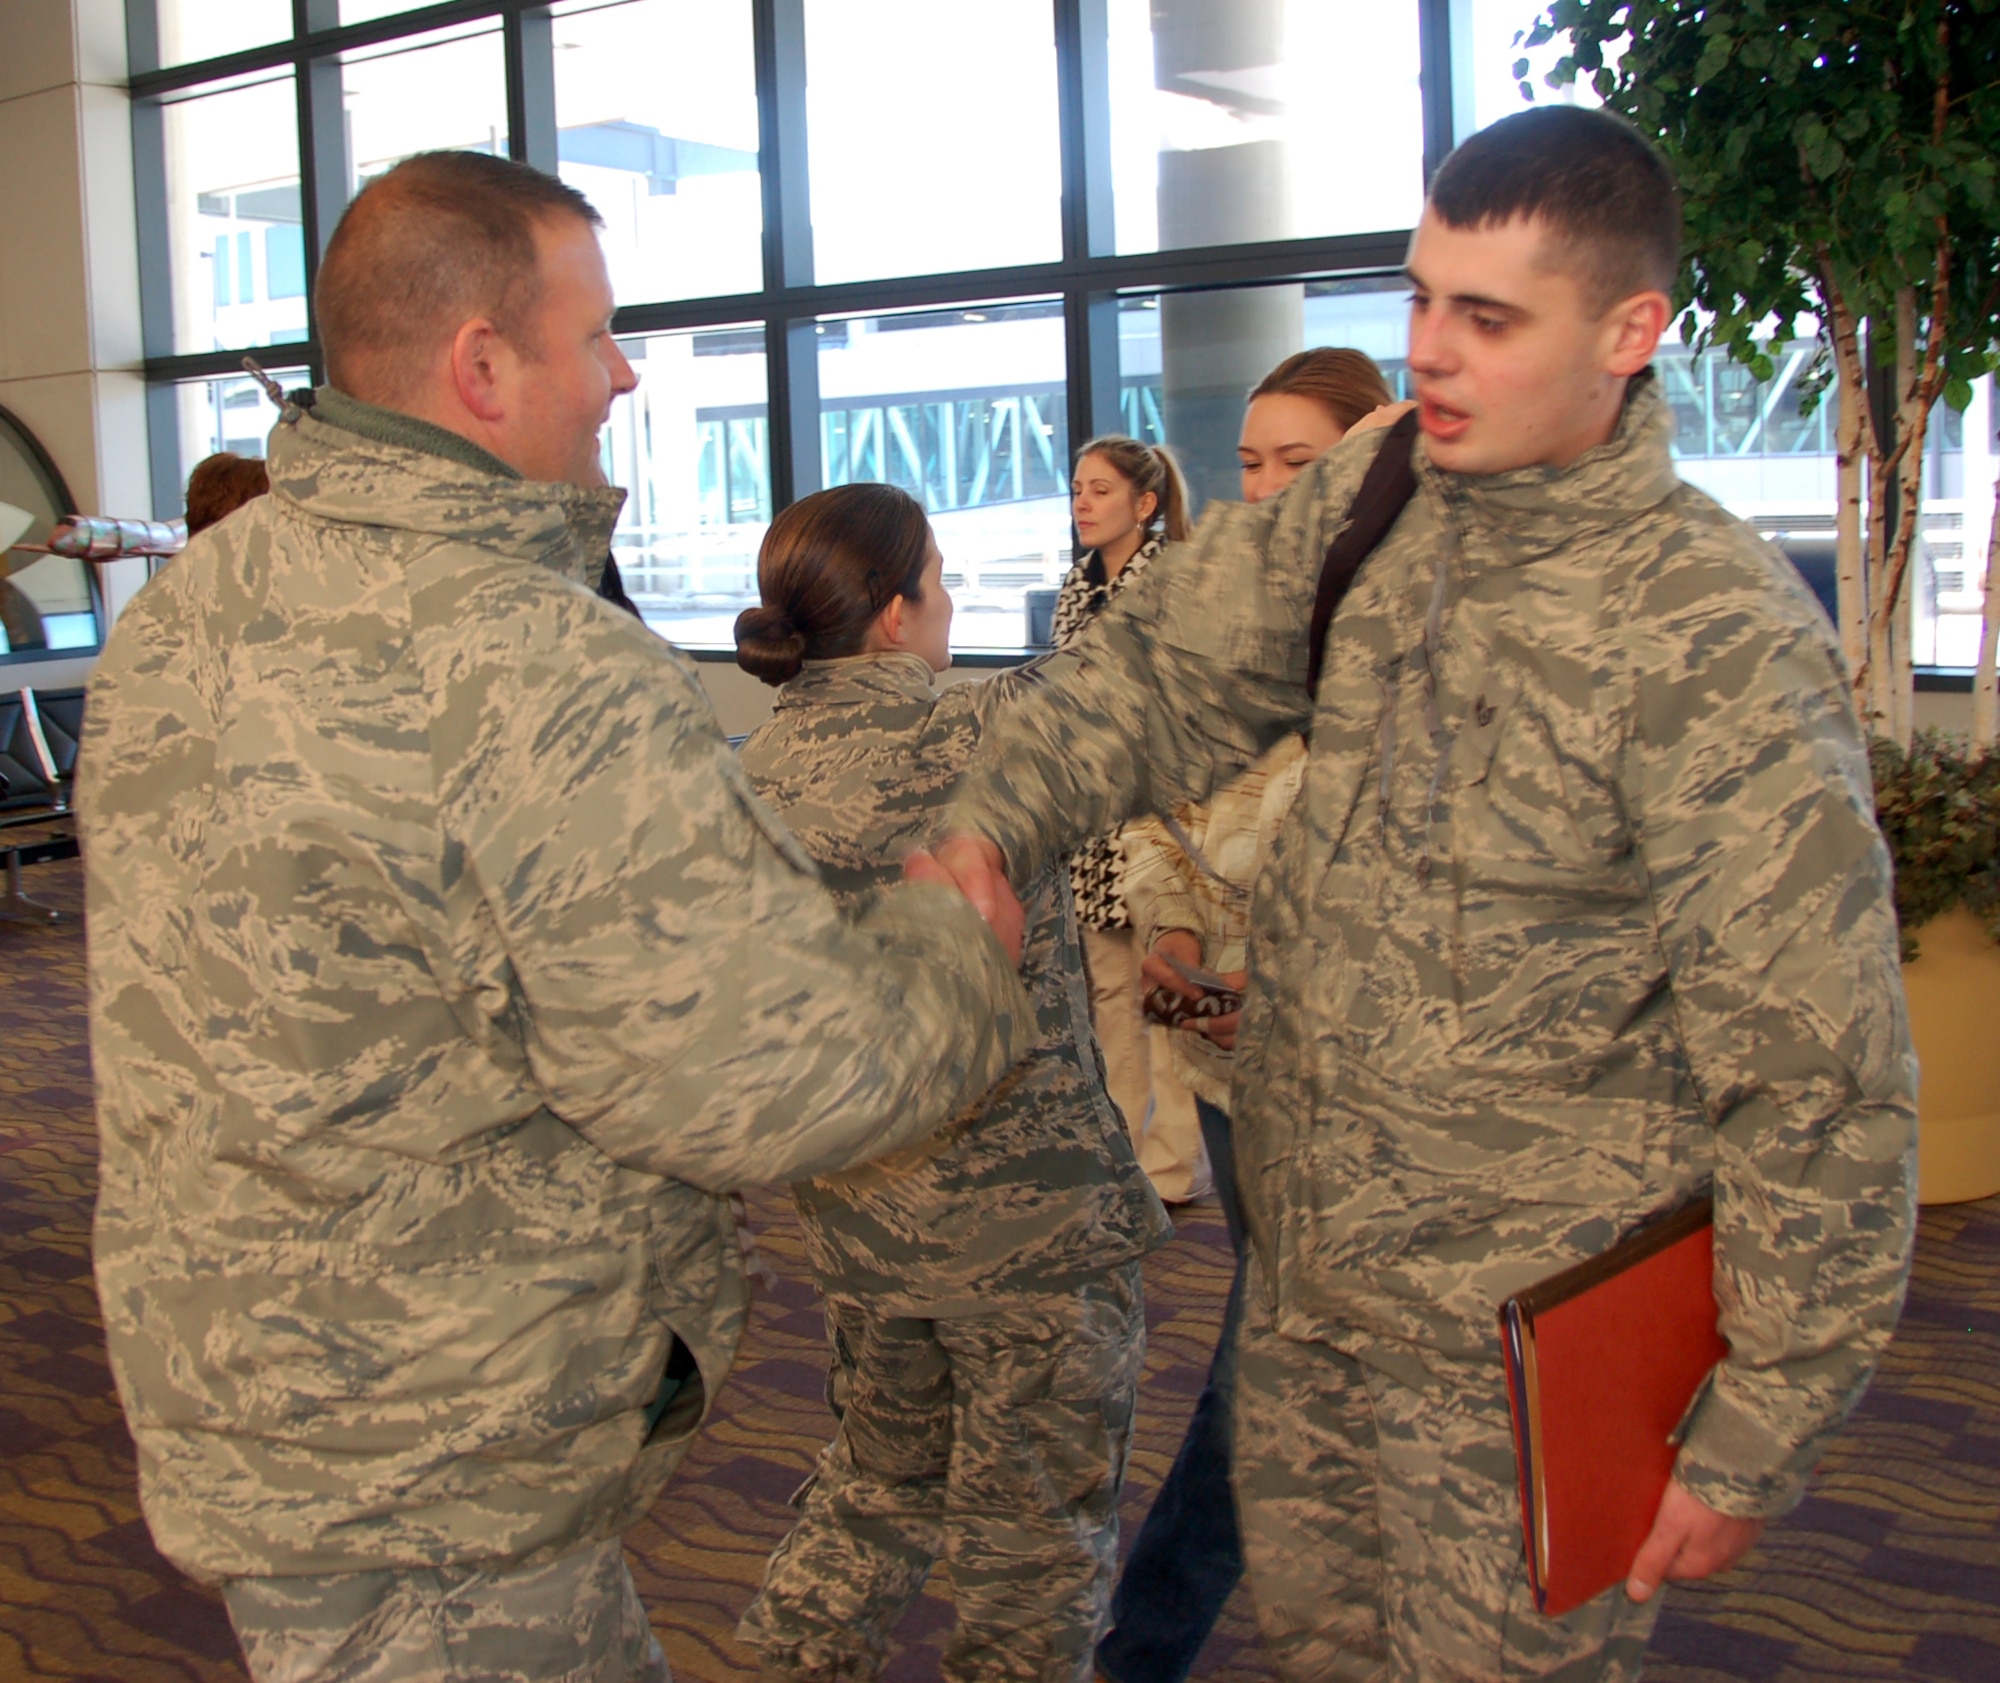 Maj. Douglas Scheirey, commander of the 103rd Force Support Squadron, shakes hands with Staff Sgt. Vitaliy Gorbachyk as he prepares to deploy to Southwest Asia with two fellow Airmen from the Bradley Air National Guard Base, East Granby, Conn. on Jan. 23, 2014.  (U.S. Air National Guard photo by Maj. Bryon M. Turner)